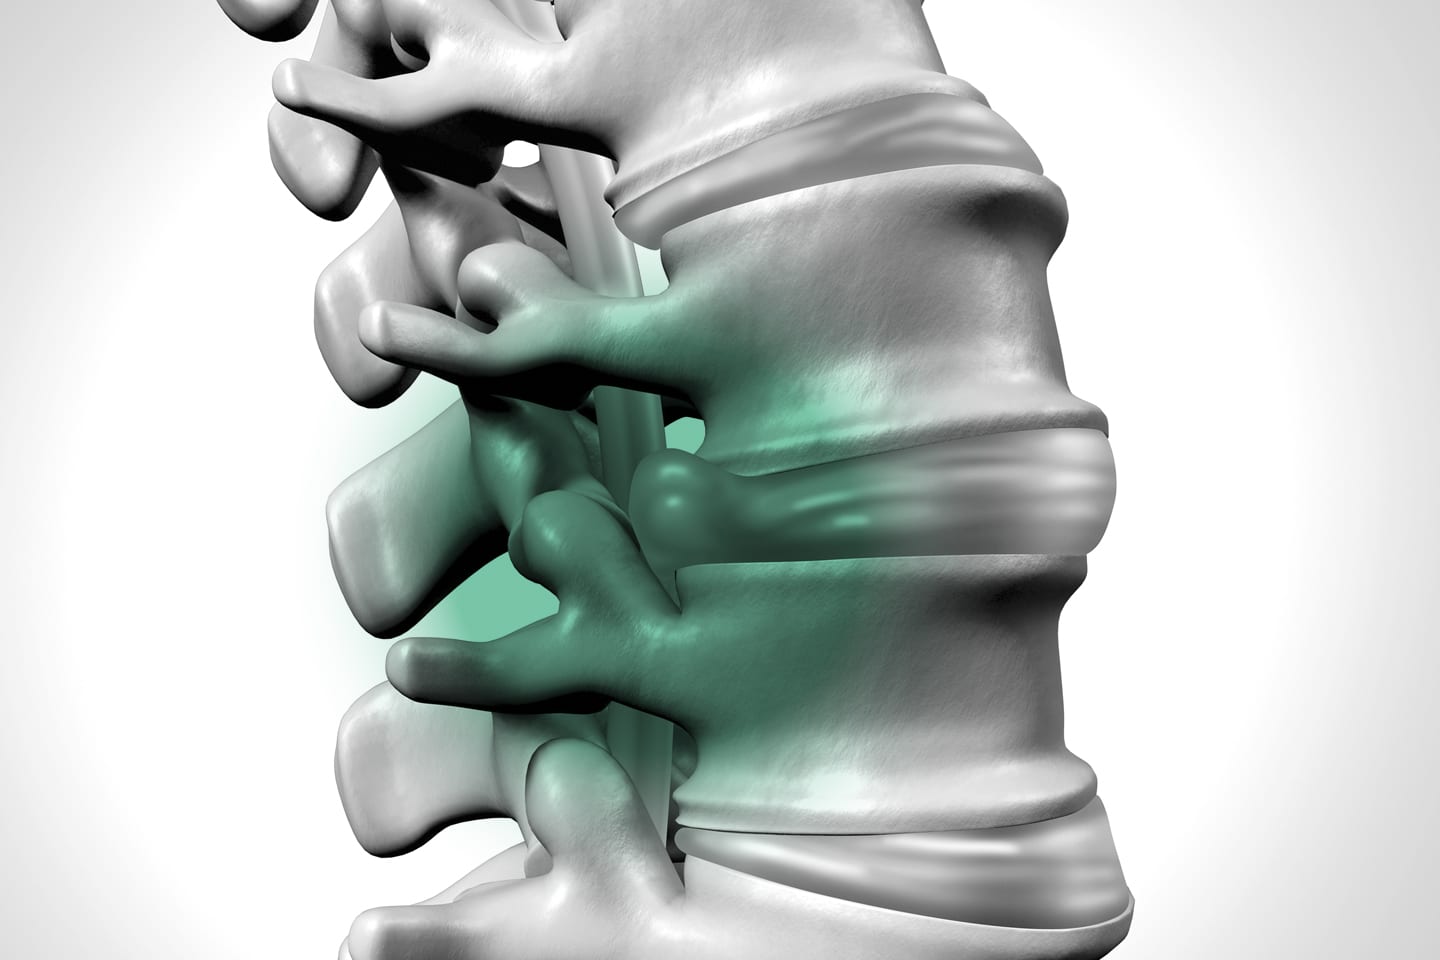 herniated disc on a spine